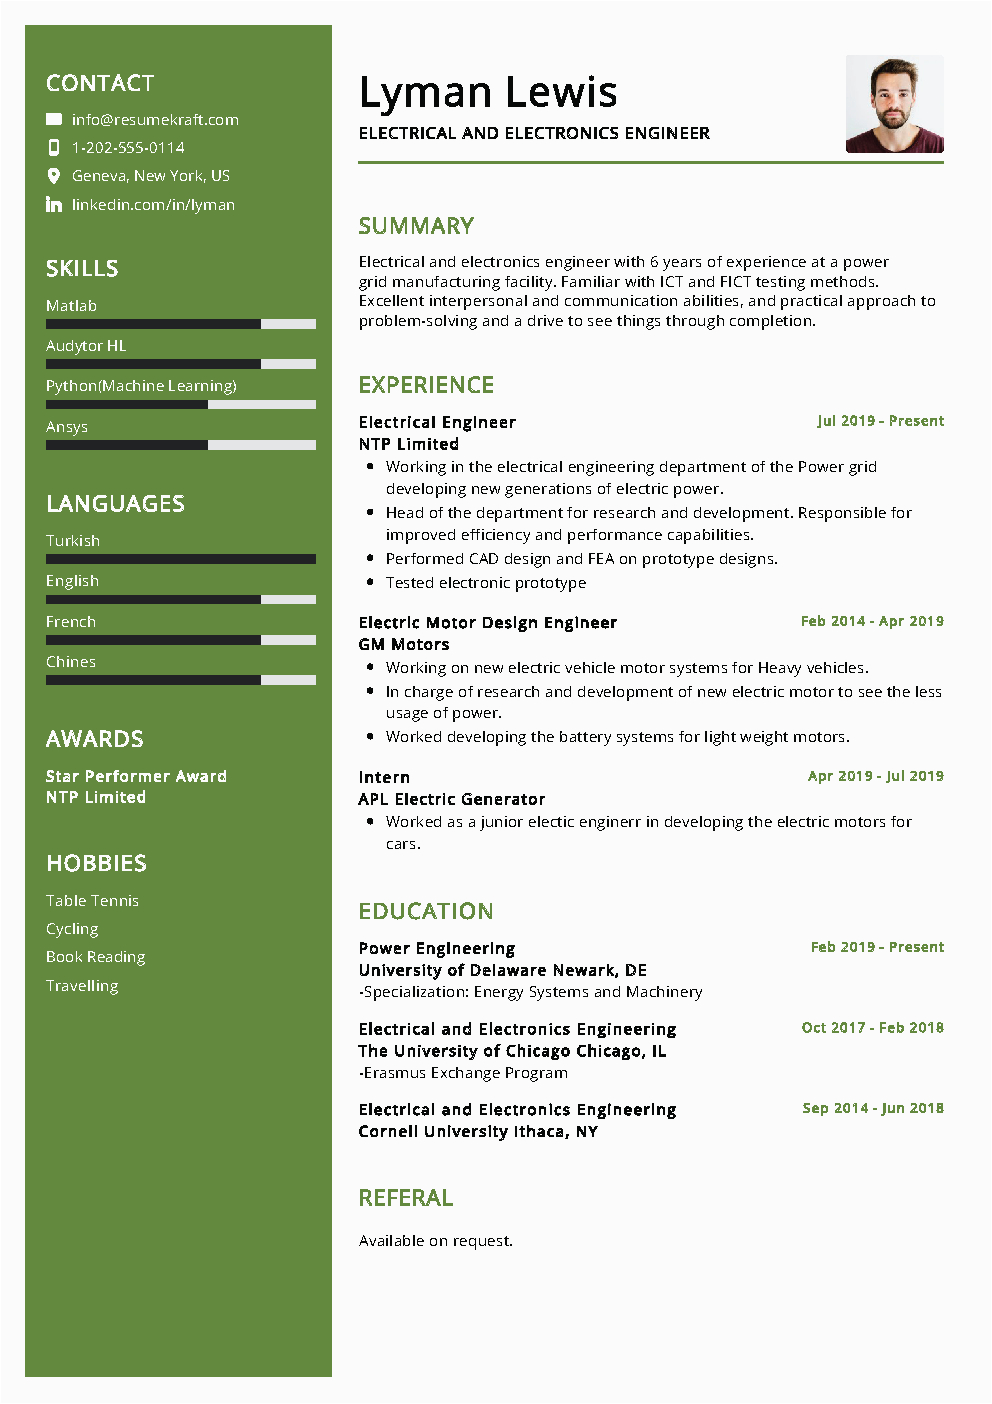 Experience Resume Sample for Electrical Engineer Electrical Engineer Resume Sample